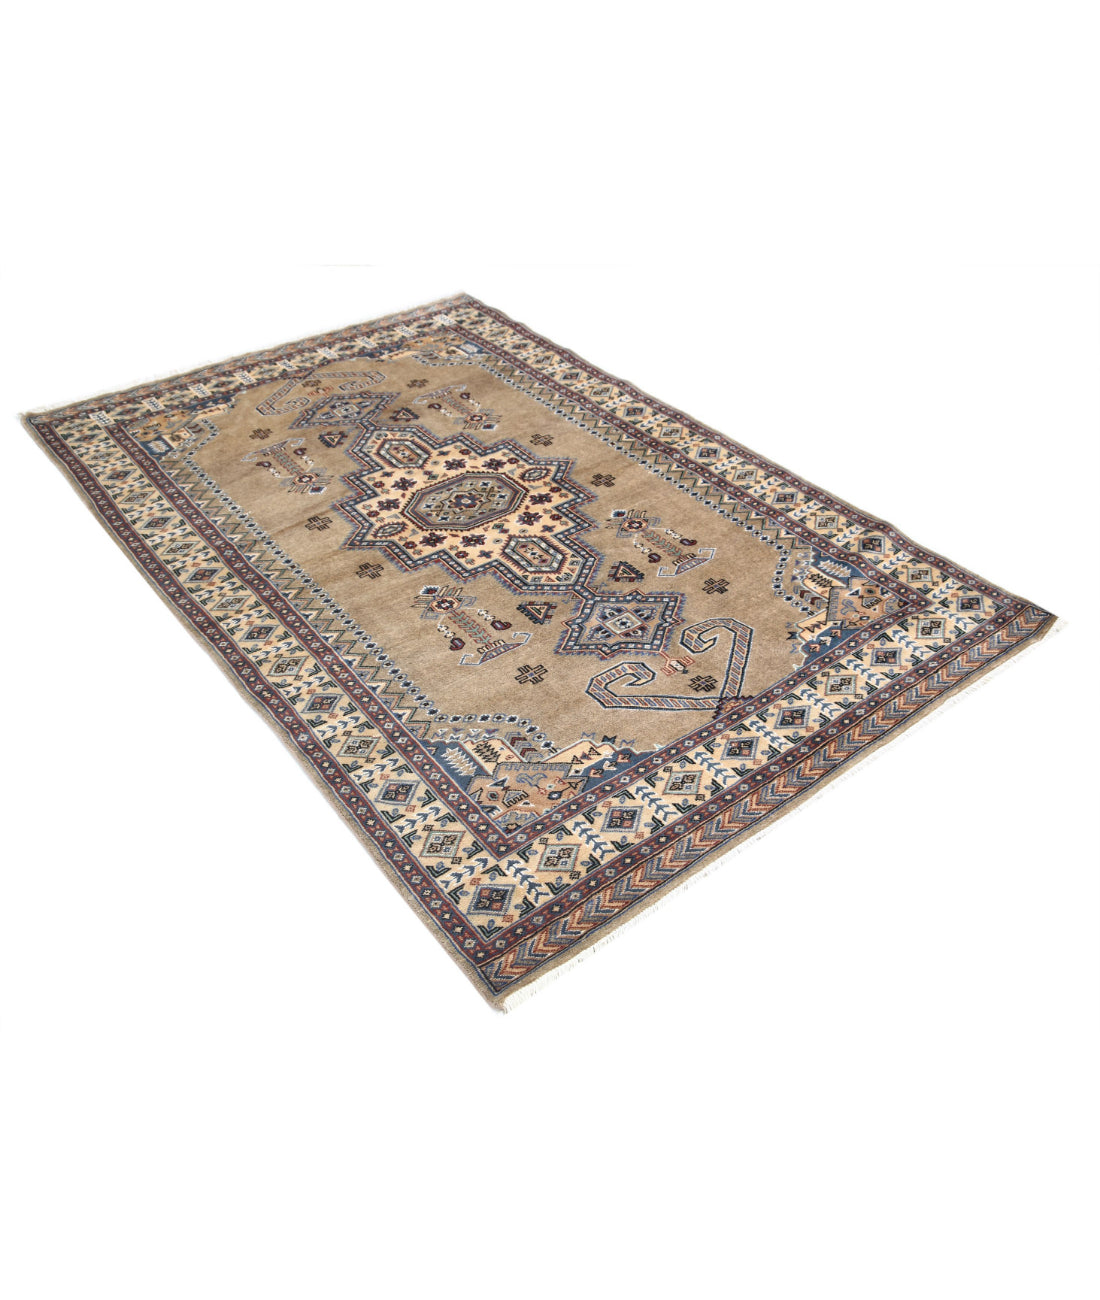 Hand Knotted Tribal Jaldar Fine Wool & Silk Rug - 4'6'' x 6'9'' 4'6'' x 6'9'' (135 X 203) / Brown / Ivory